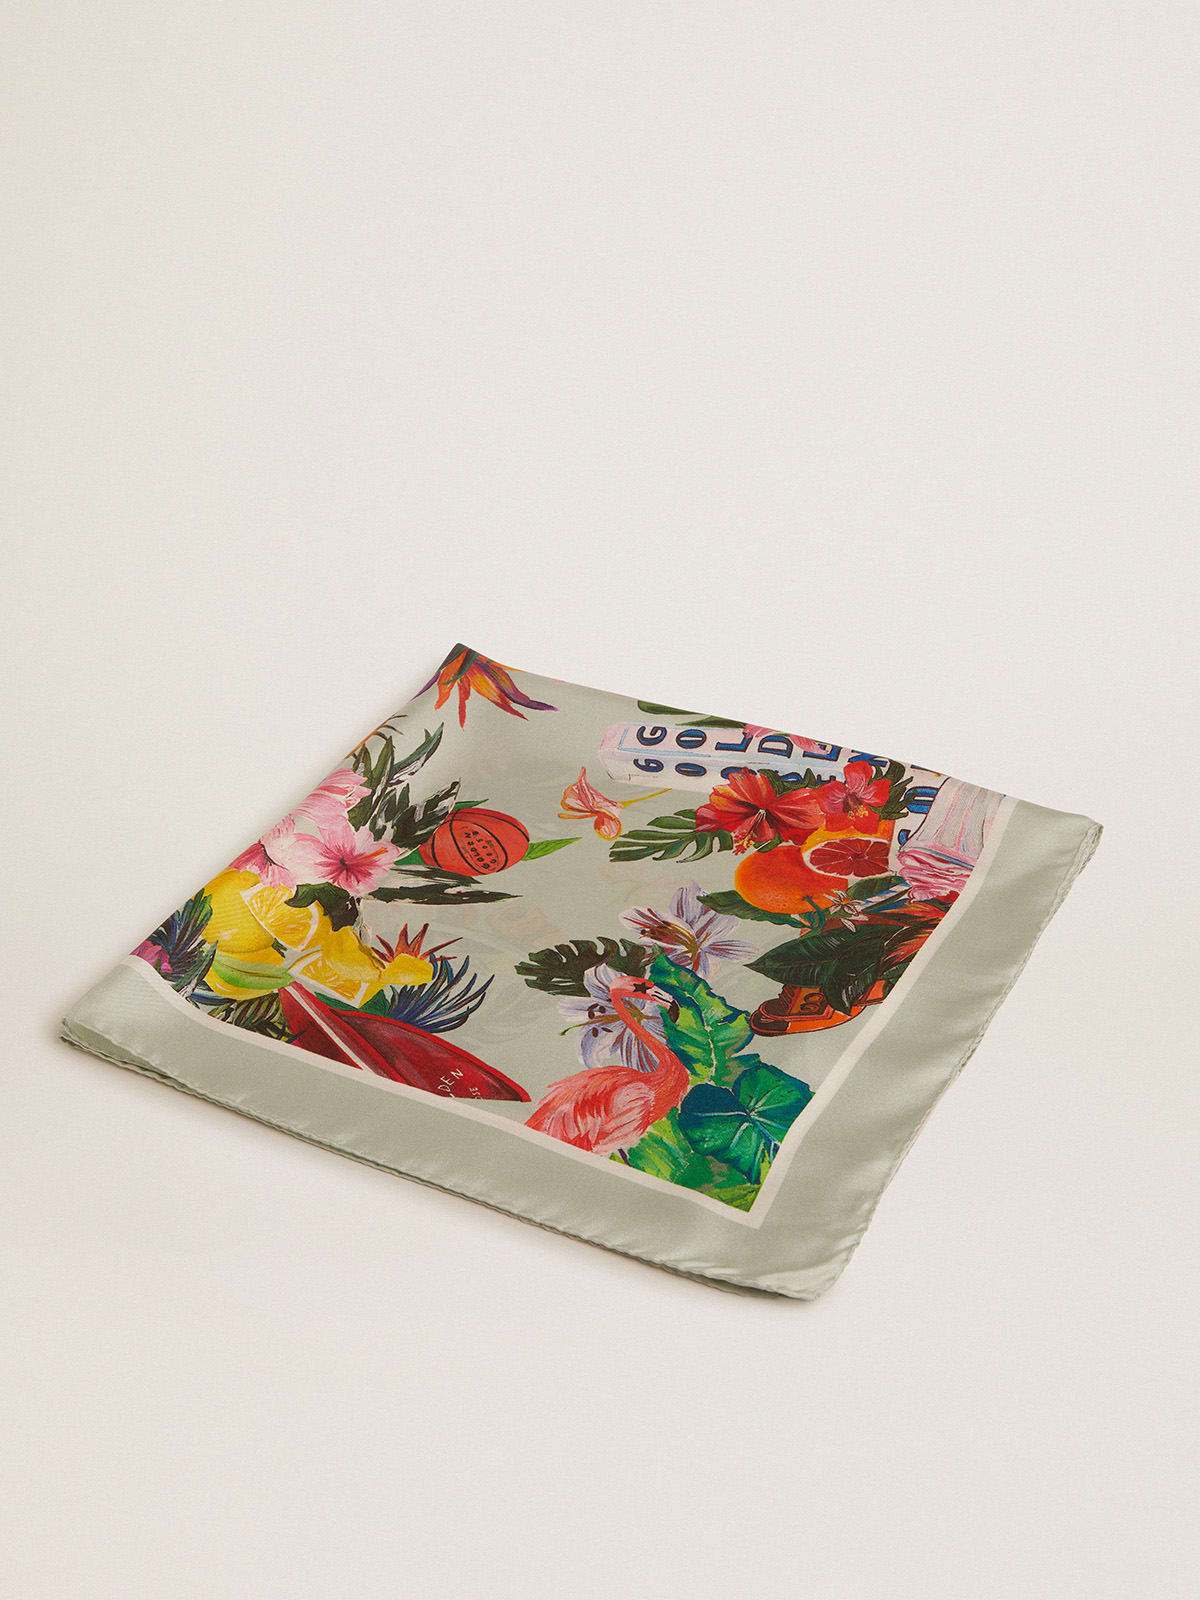 Mint-green silk scarf with multicolored tropical print